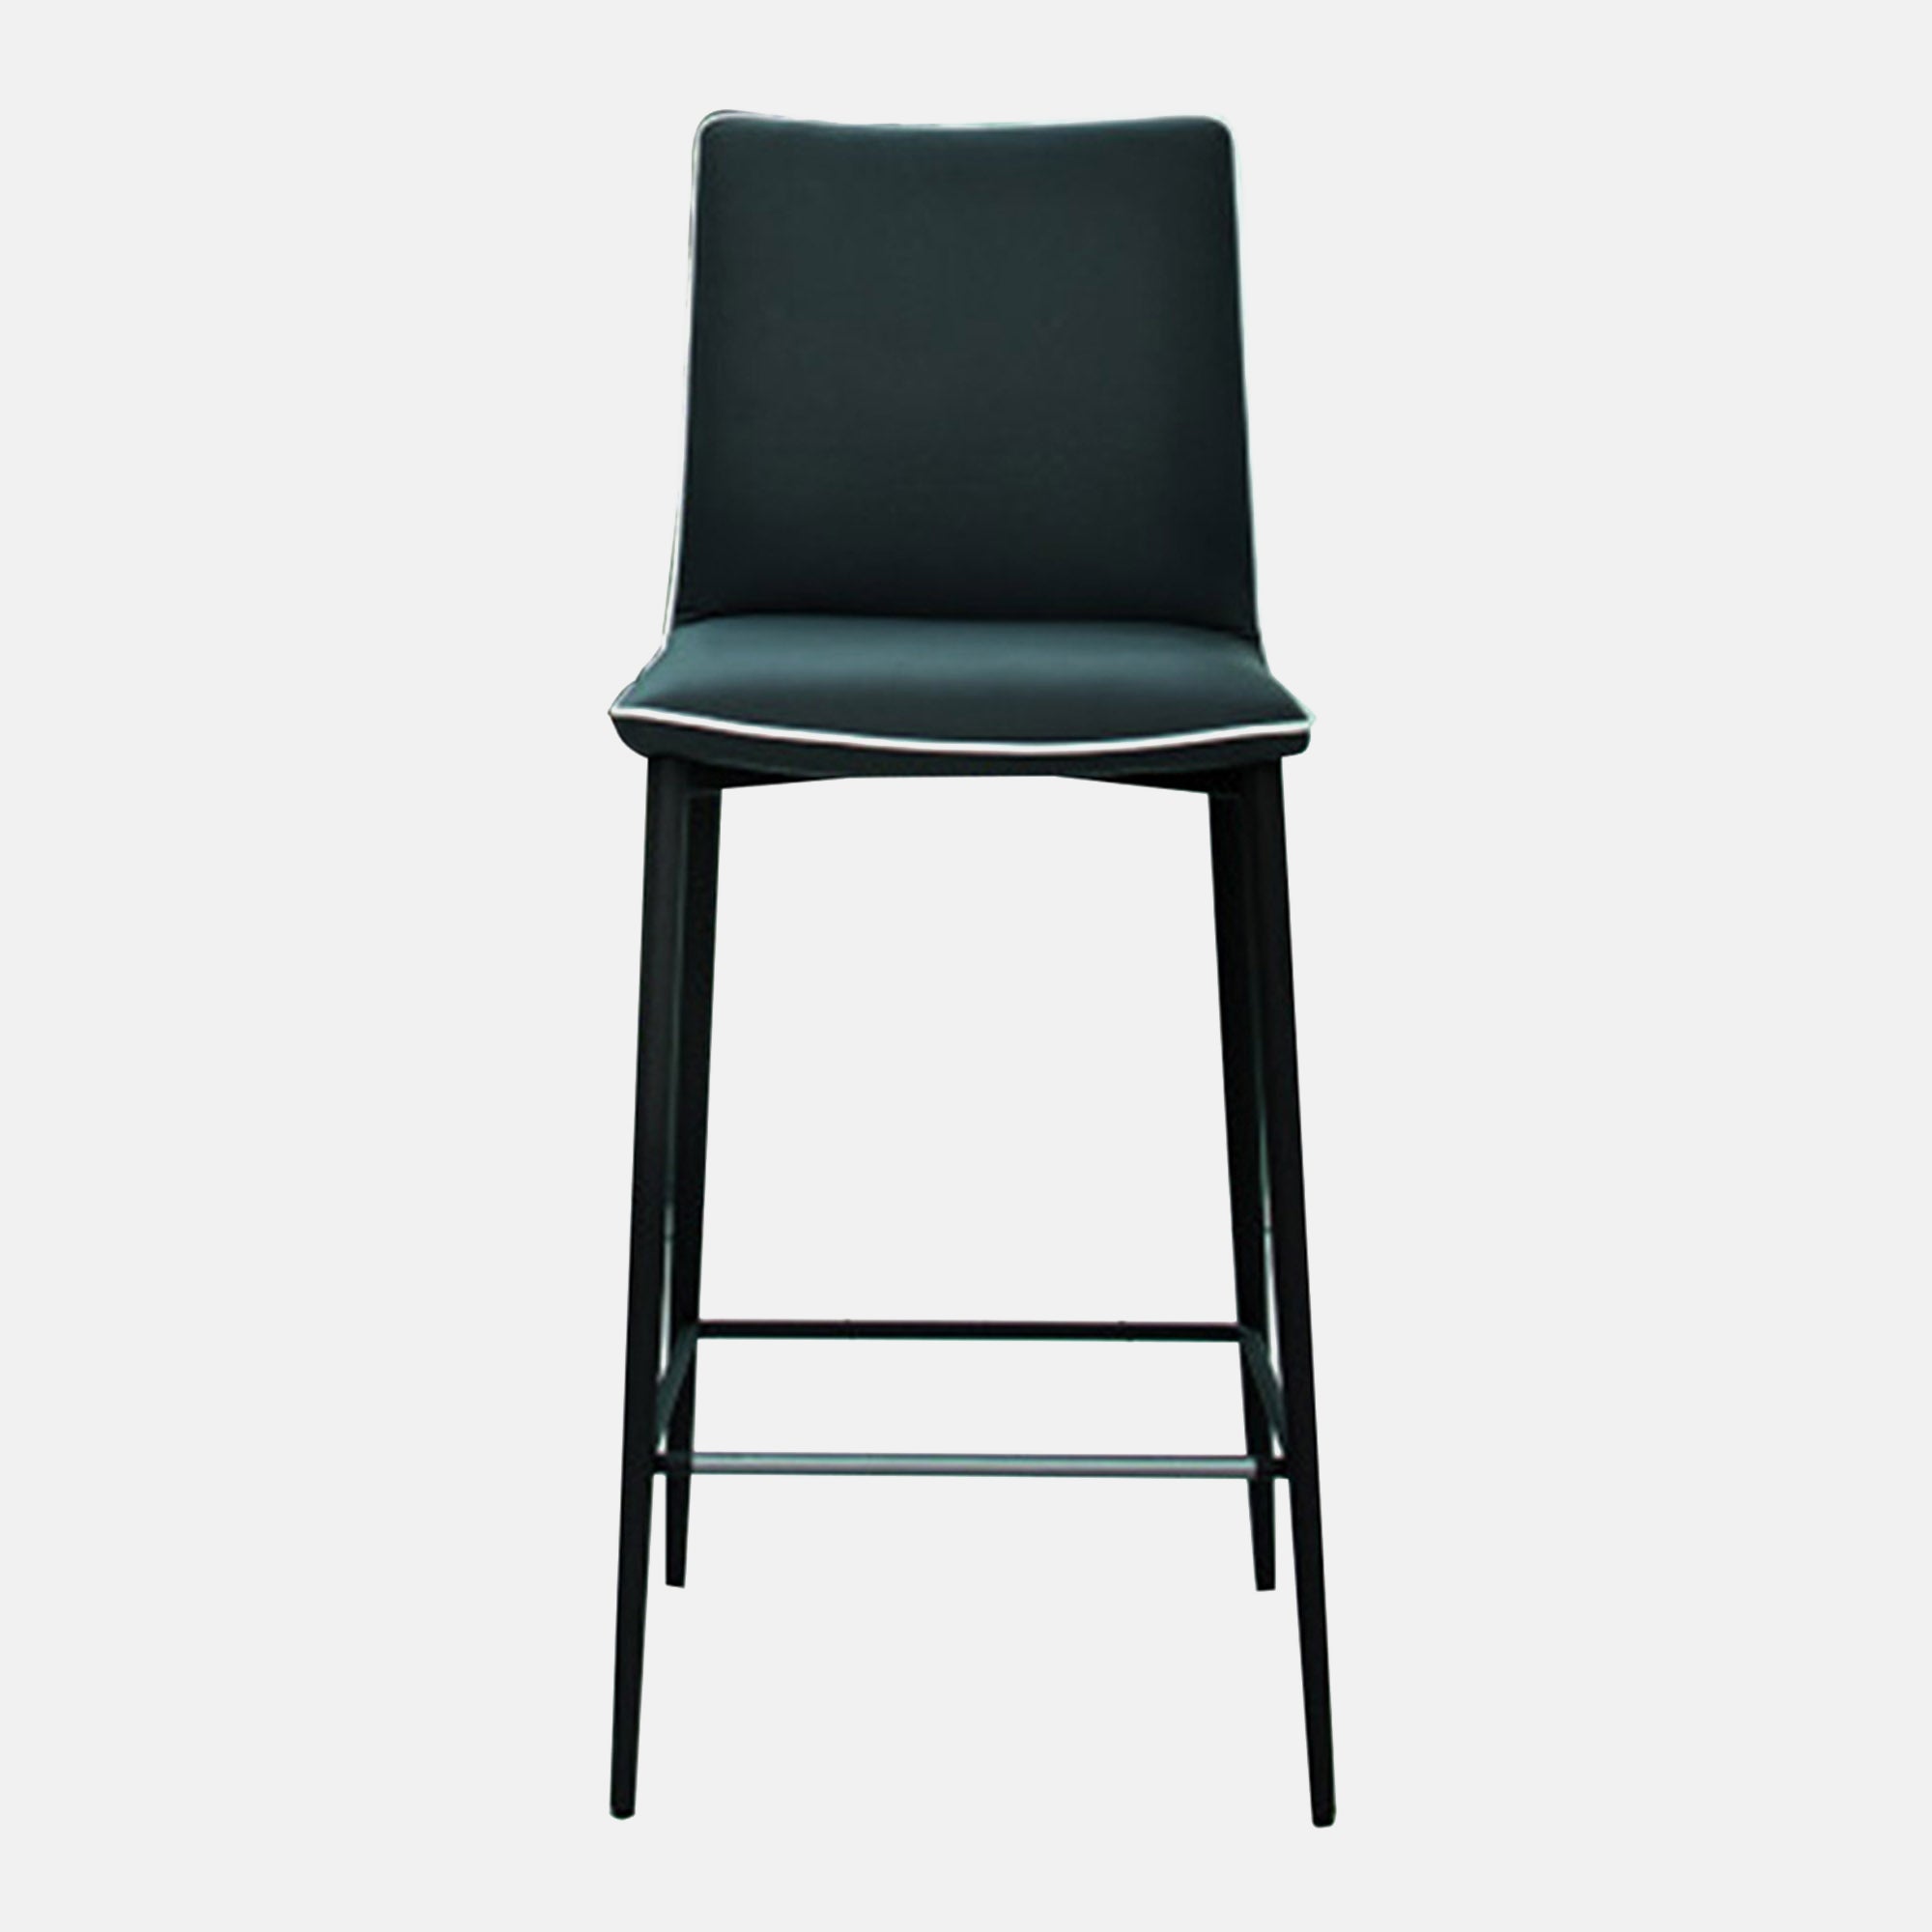 34.35 Low Barstool Metal Legs in Eco Leather with Matching Piping